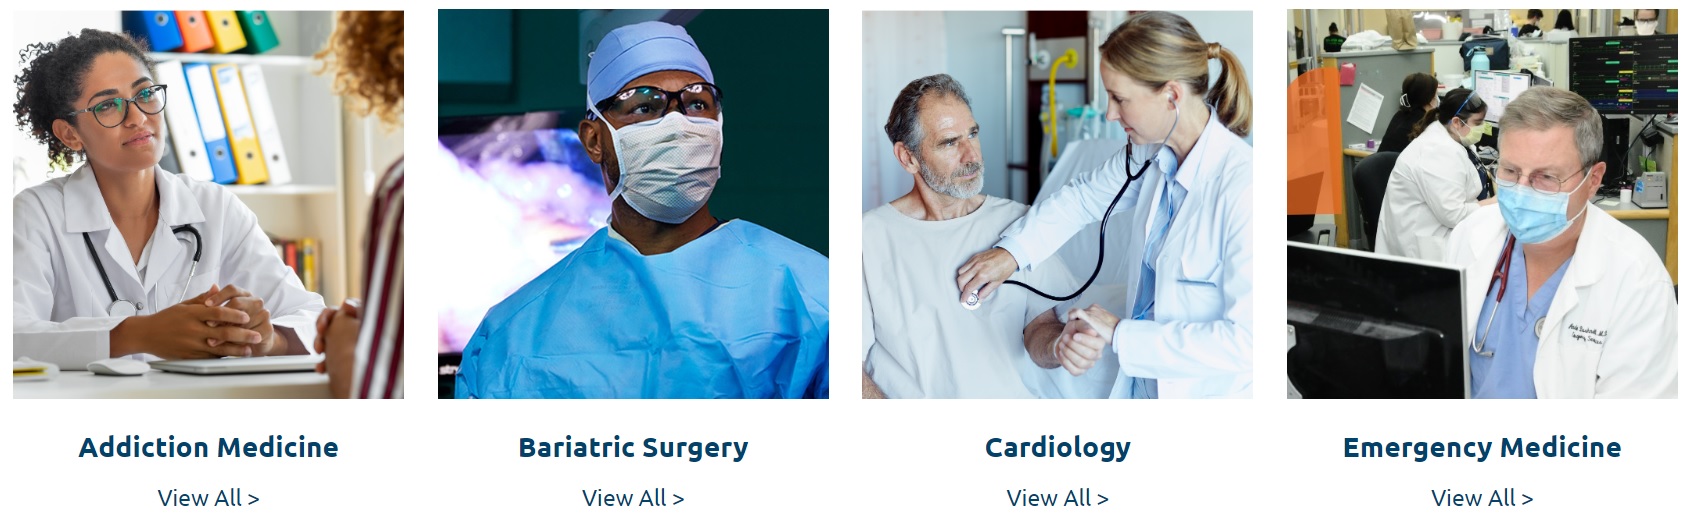 hospital website design image of staff directory by department addiction medicine view all bariatric surgery view all cardiology view all emergency medicine view all